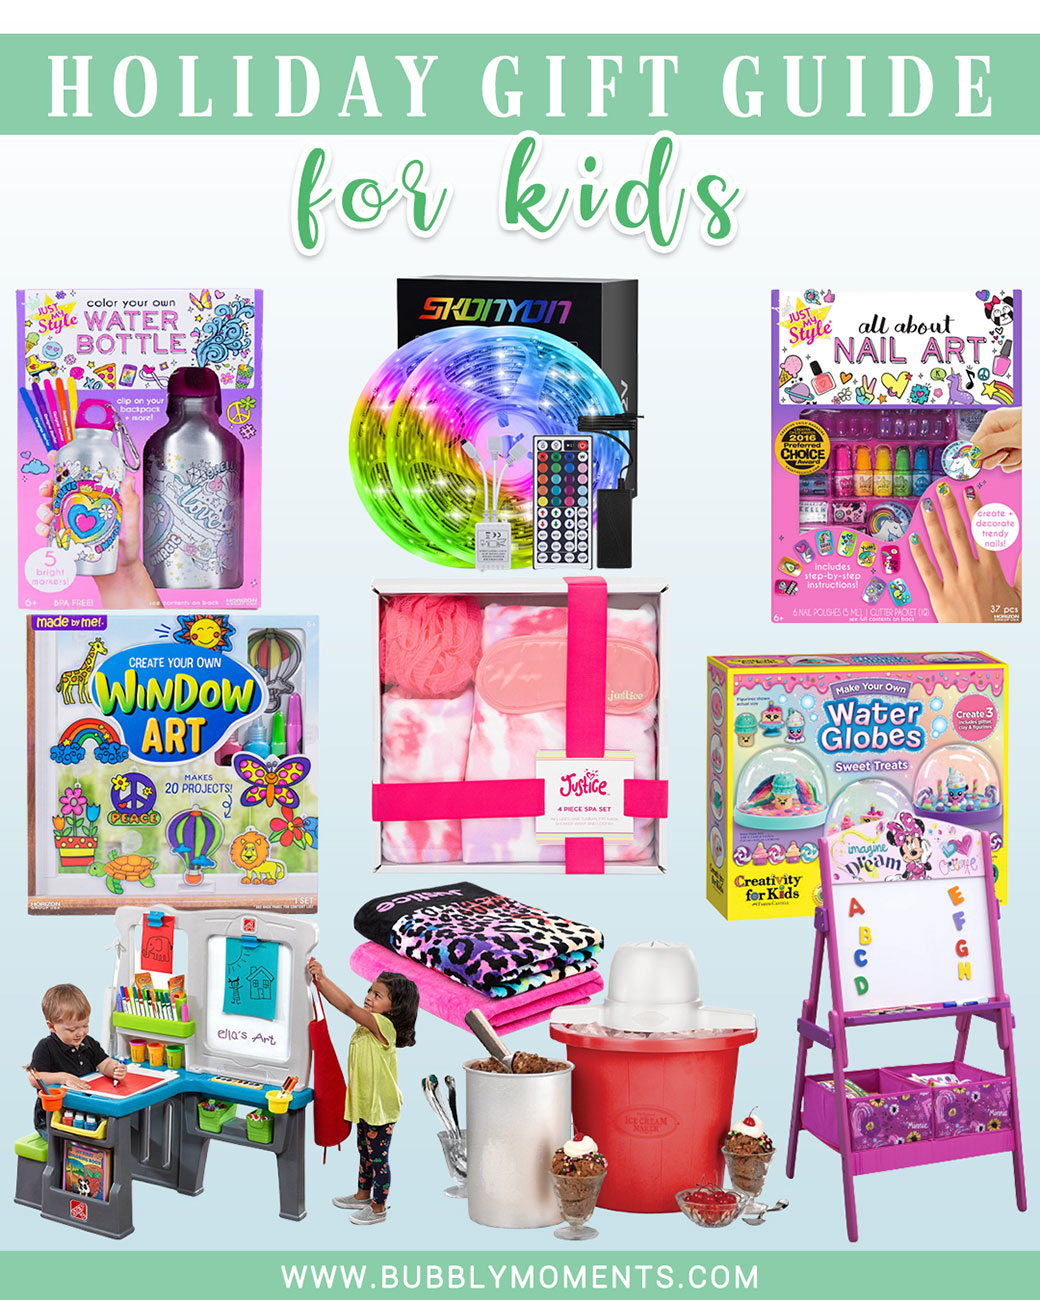 Craft Kits for Kids | Nail Art Toys | Pretend Play Set | Activity Easil | Ice Cream Maker | Outdoor toys | ArtDesk Window Art | Water Bottle Gift Ideas | inflatable chair for kids | Holiday Gift for Children | Christmas Gift for Kids | Children's Christmas Gift Guides | Bubbly Moments